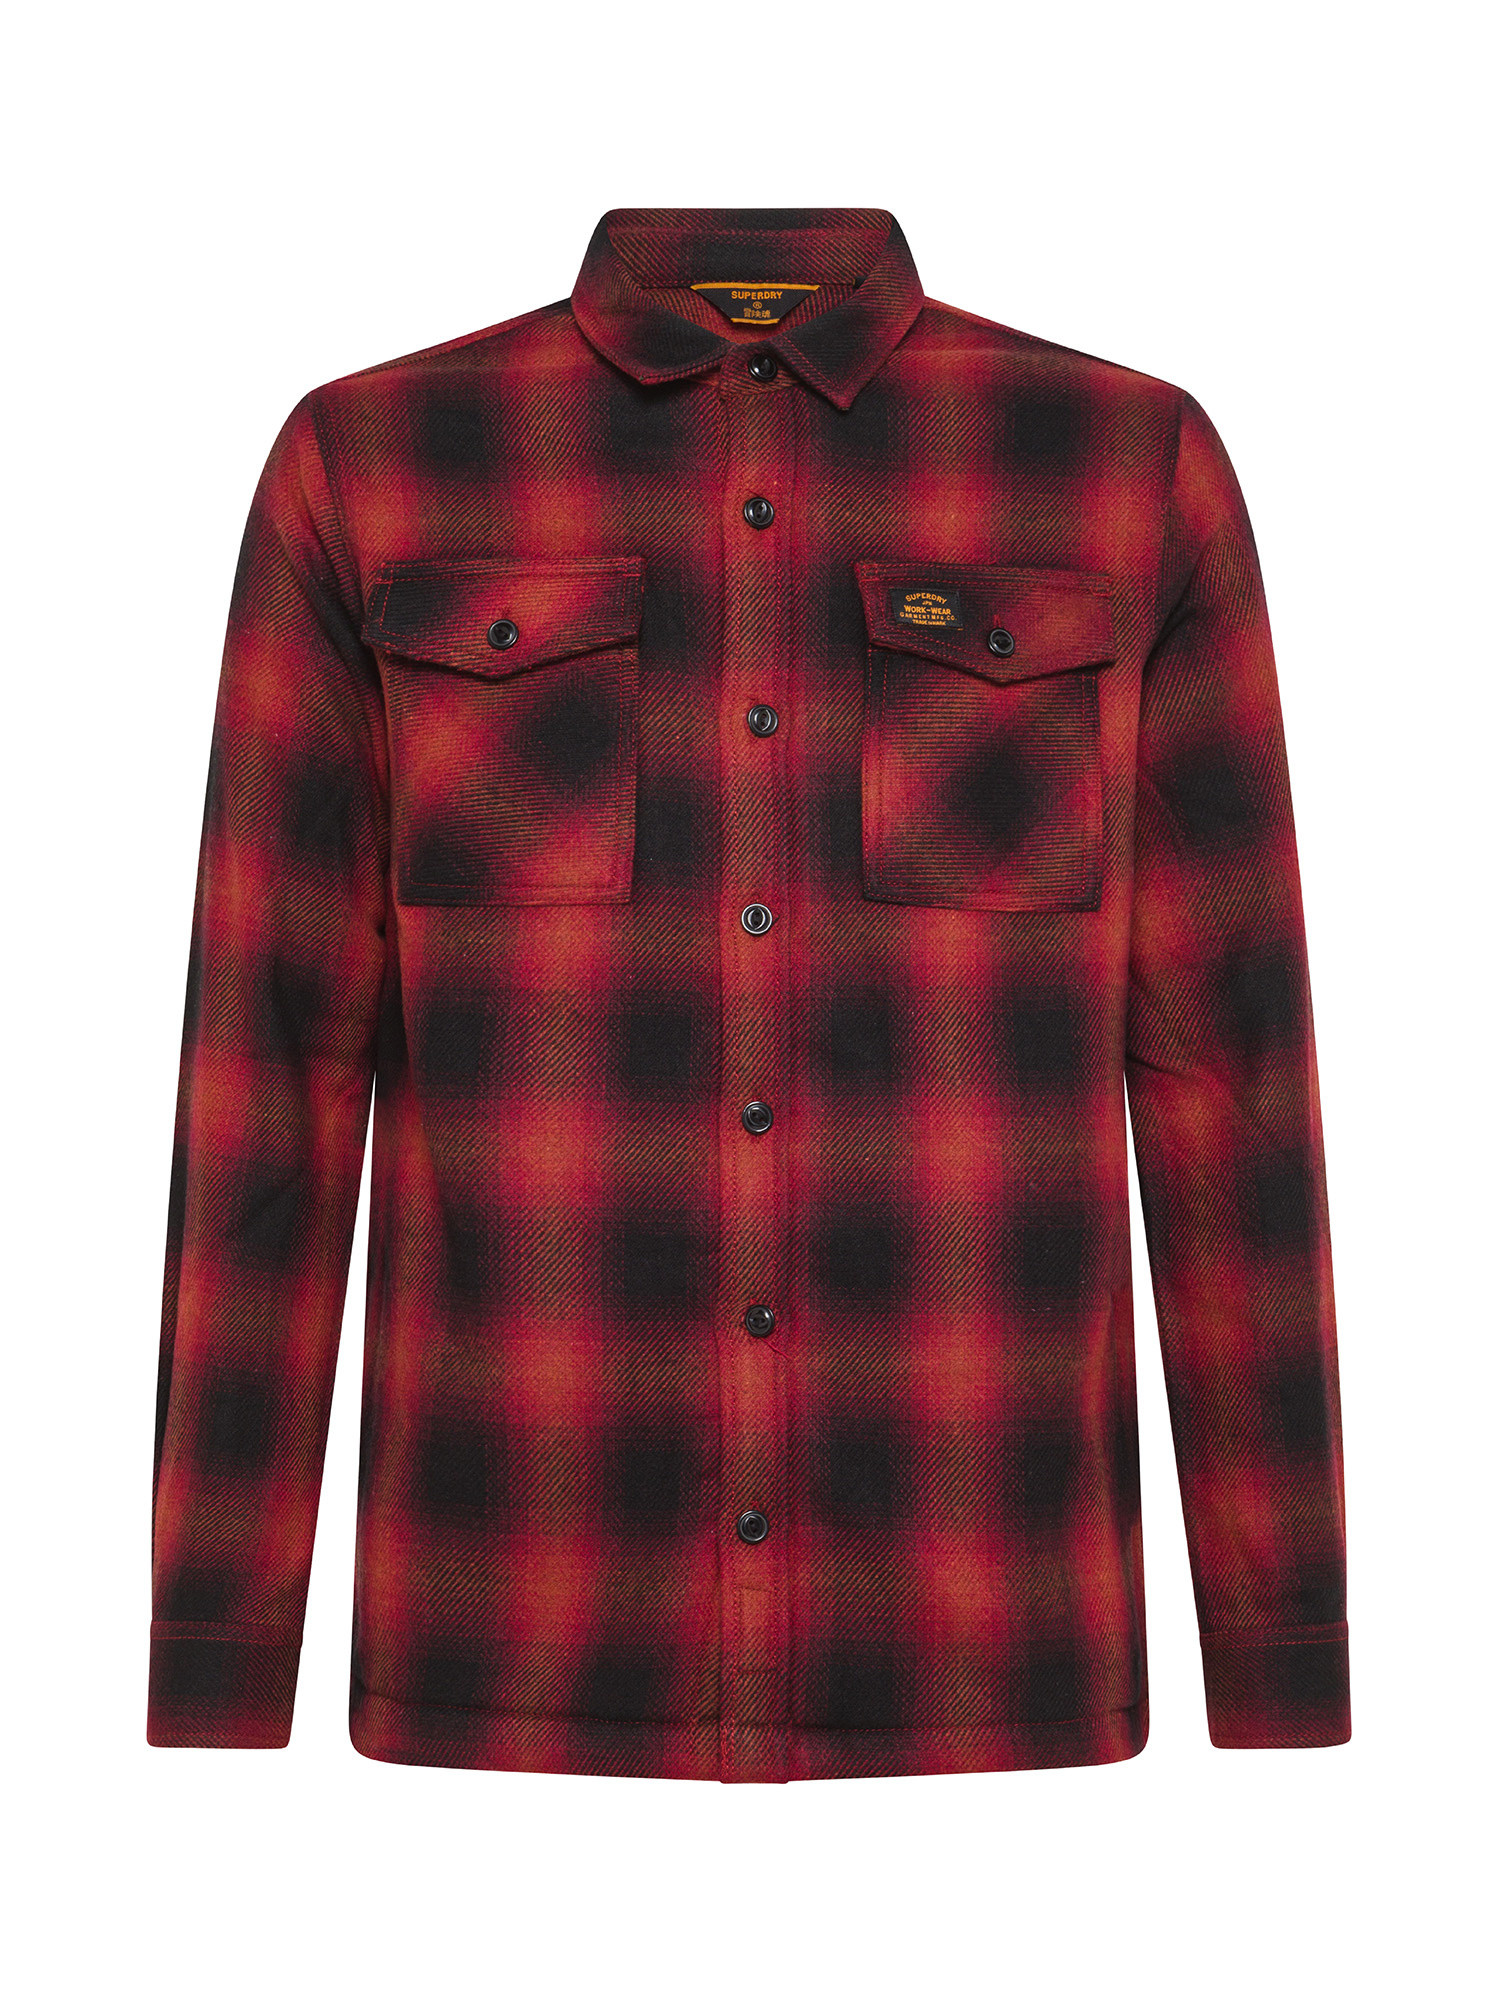 Superdry - Sherpa lined shirt, Red, large image number 0